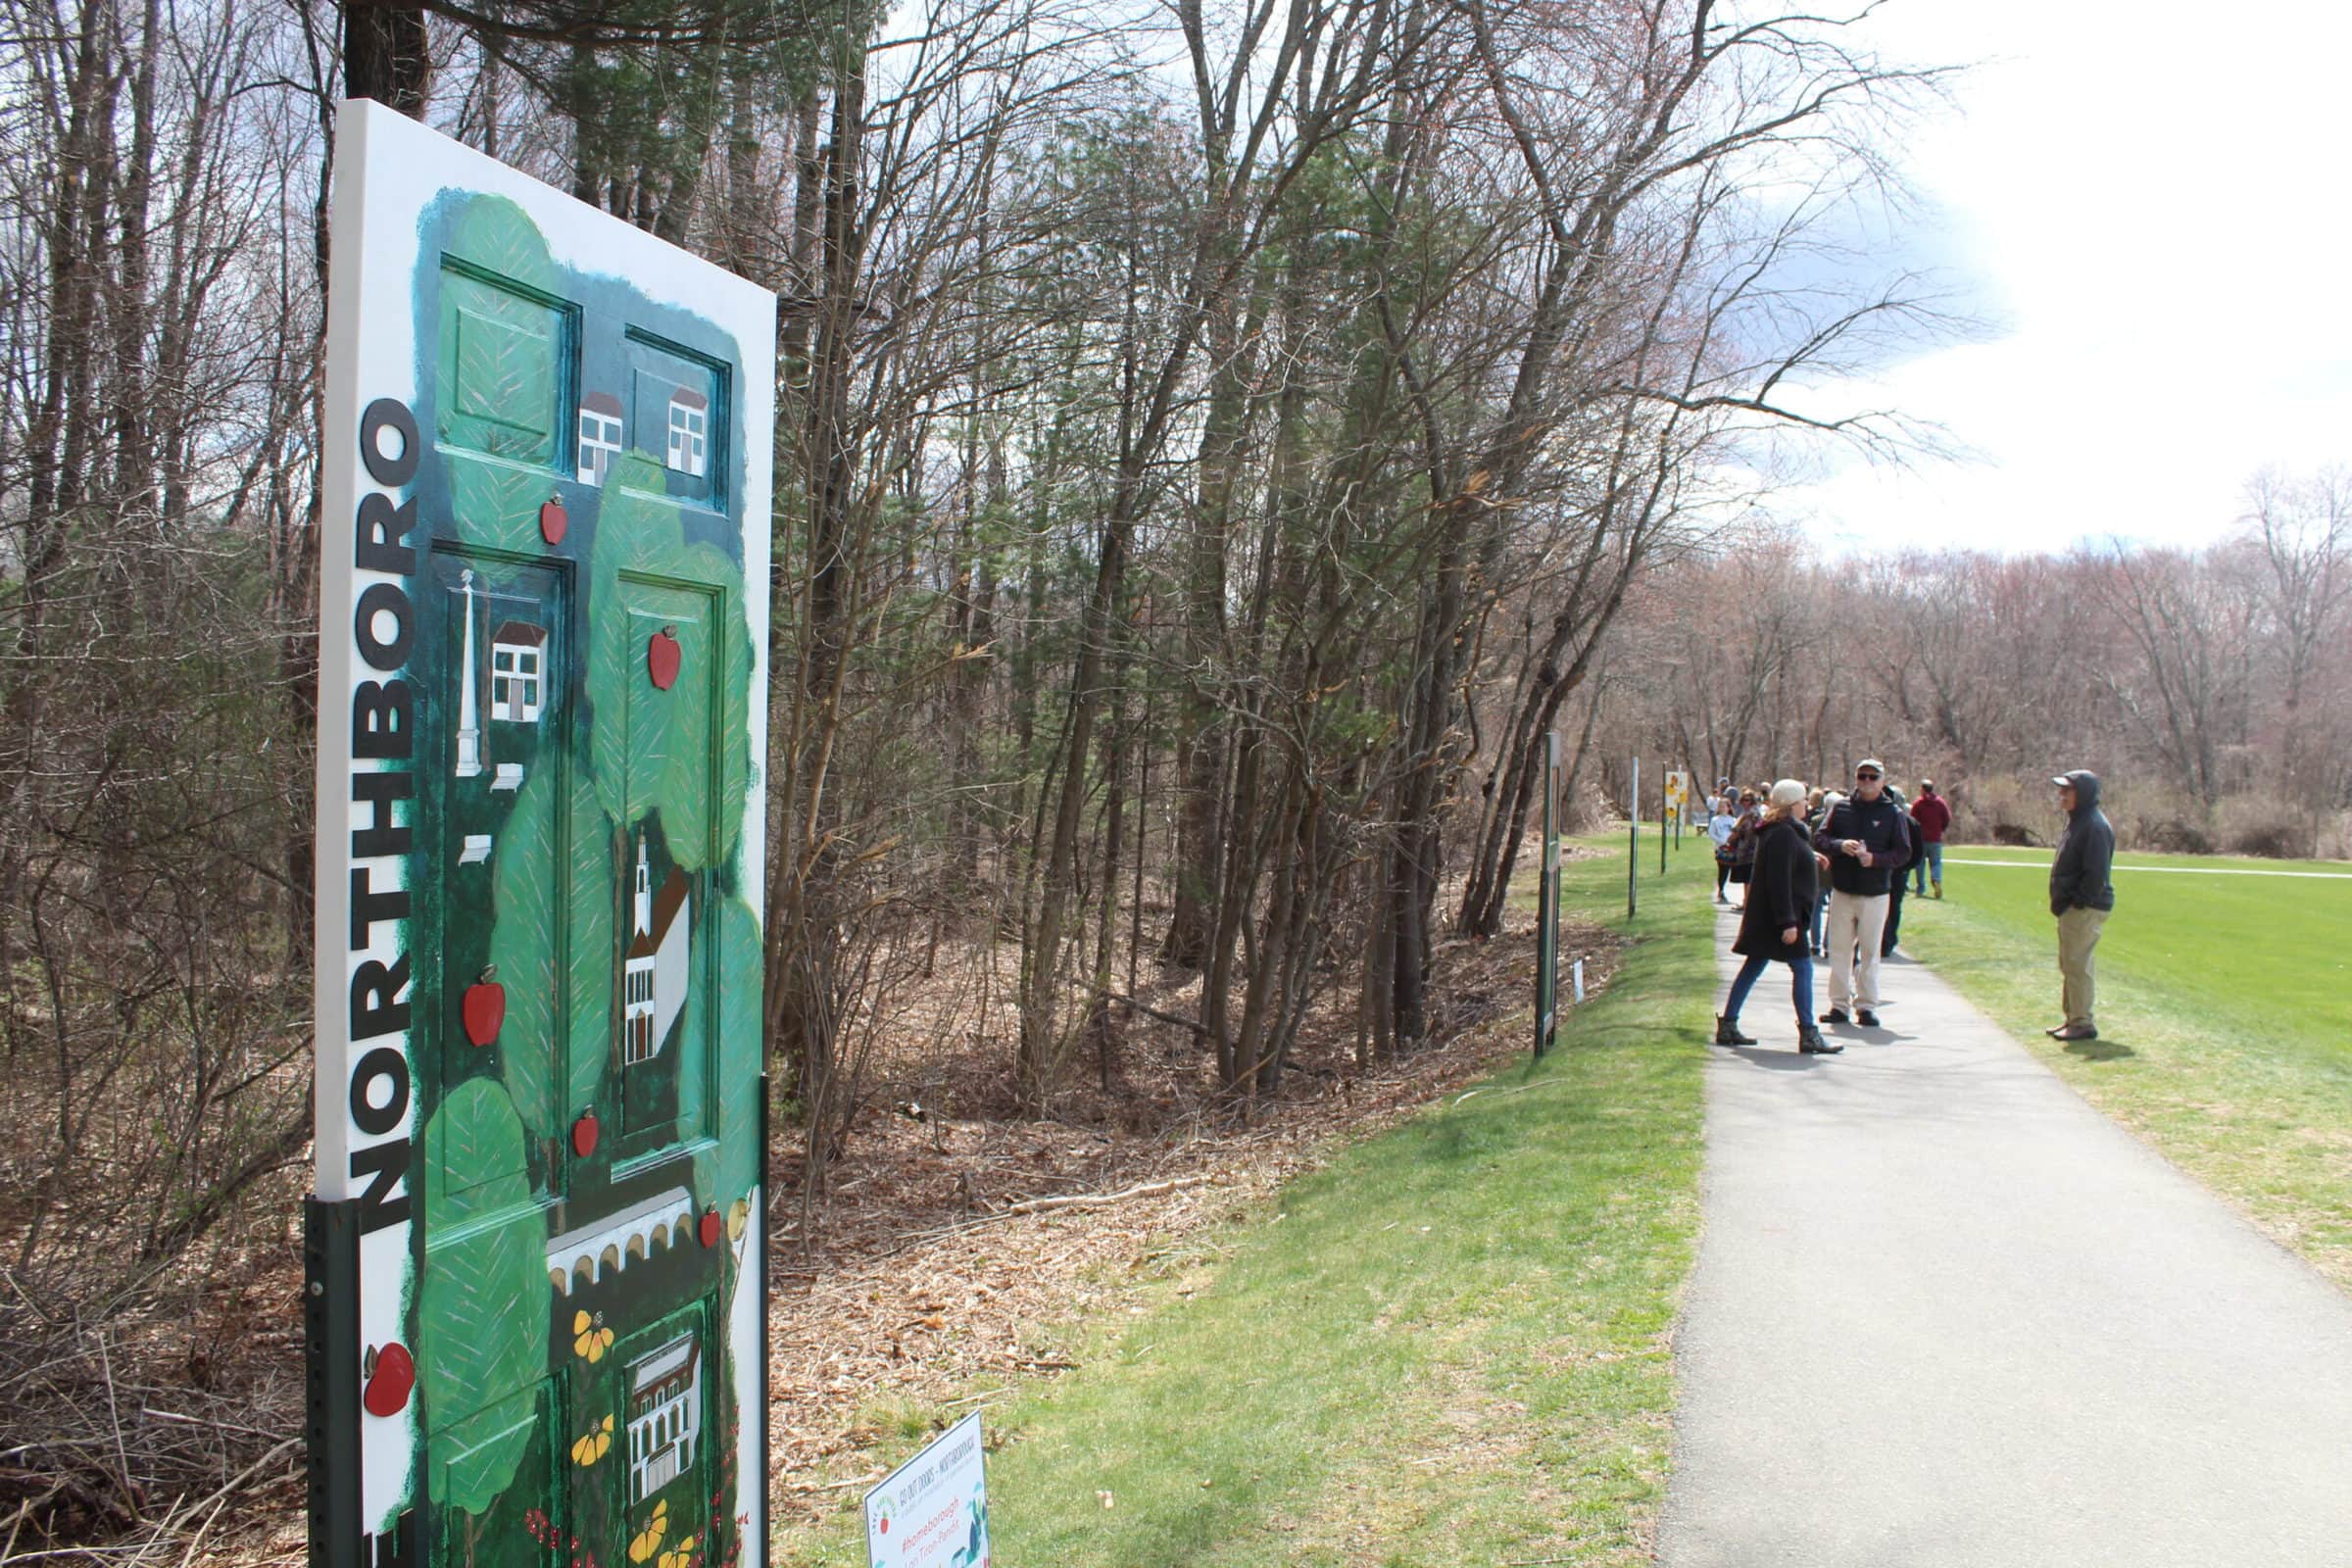 Go Out Doors returns to Northborough